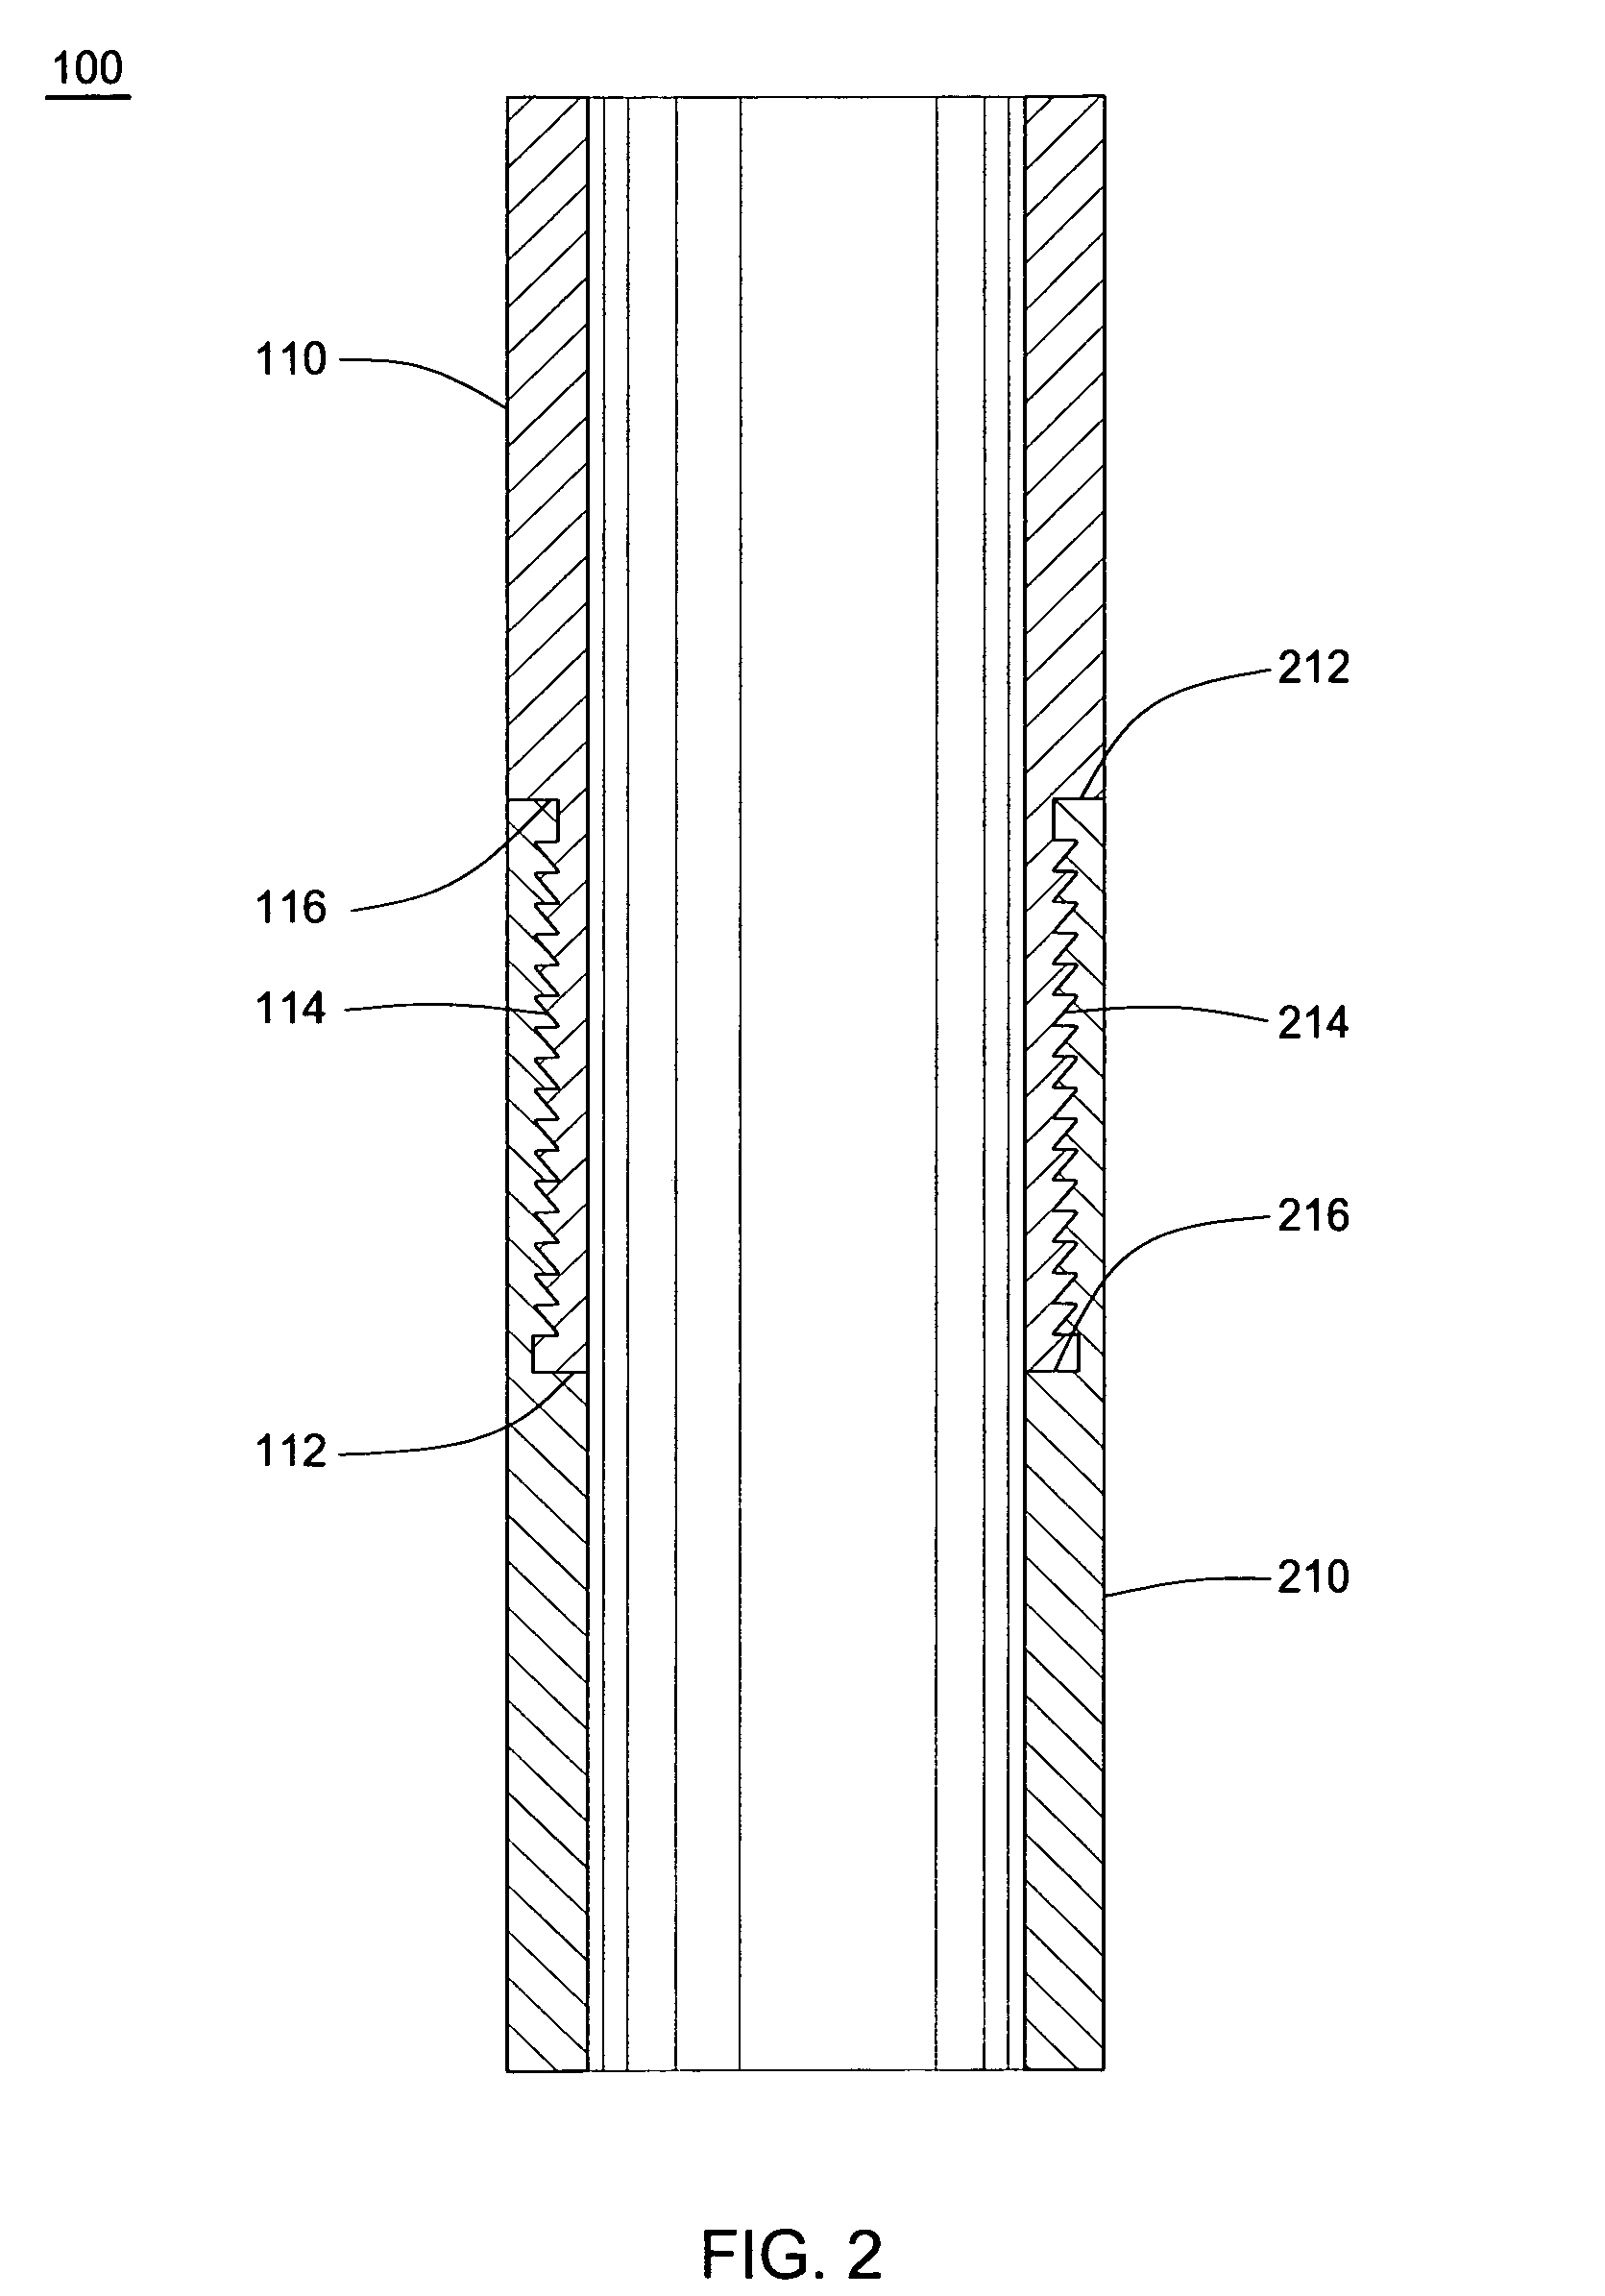 Method of jointing and running expandable tubulars